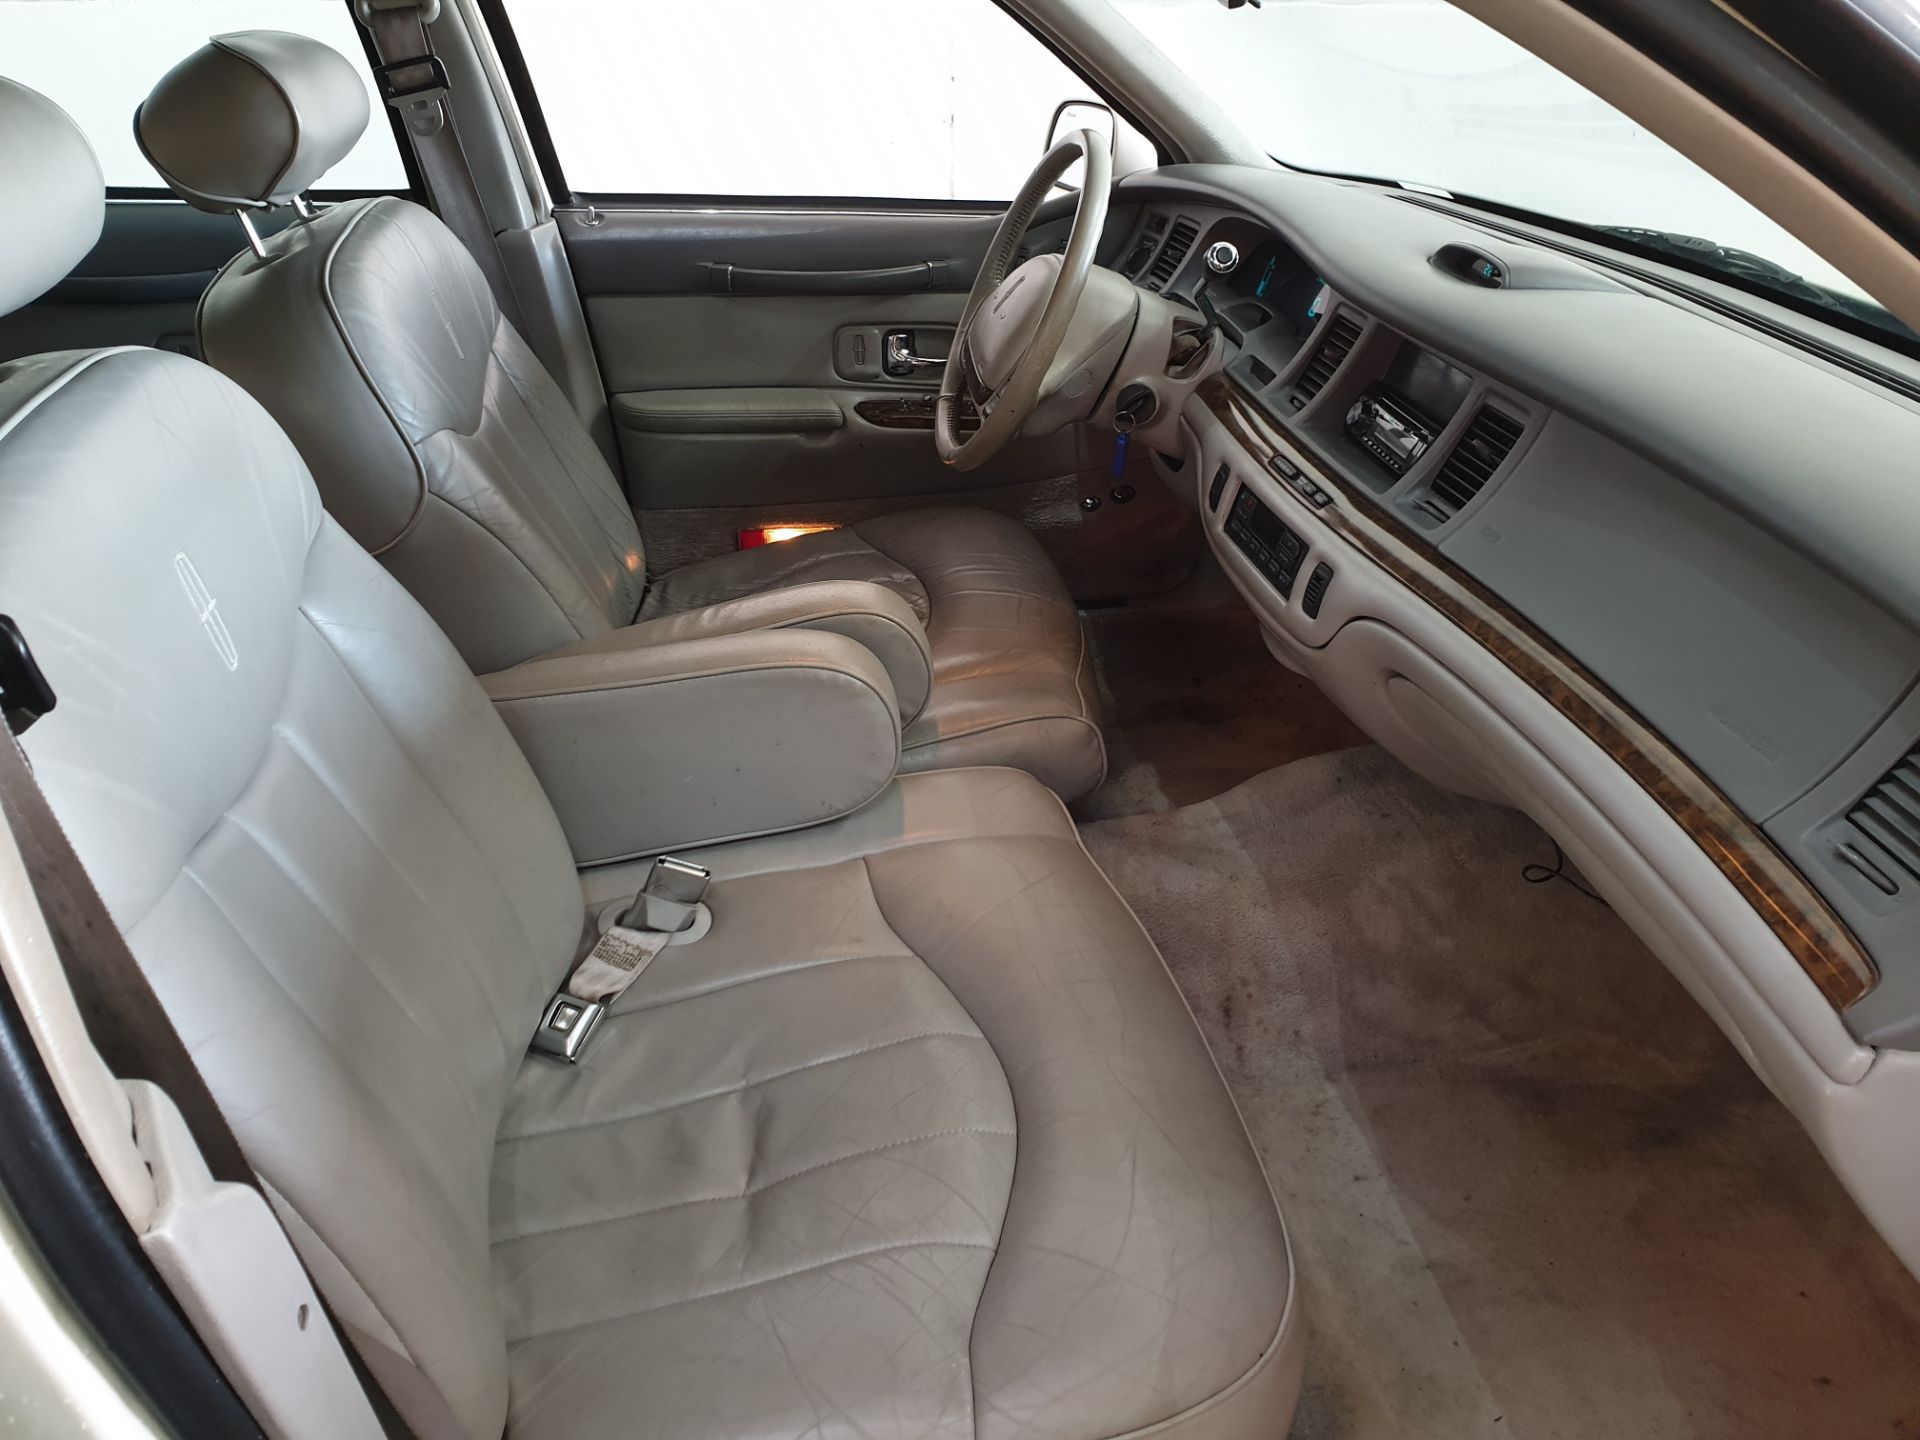 1999 Lincoln Town Car - Image 10 of 16